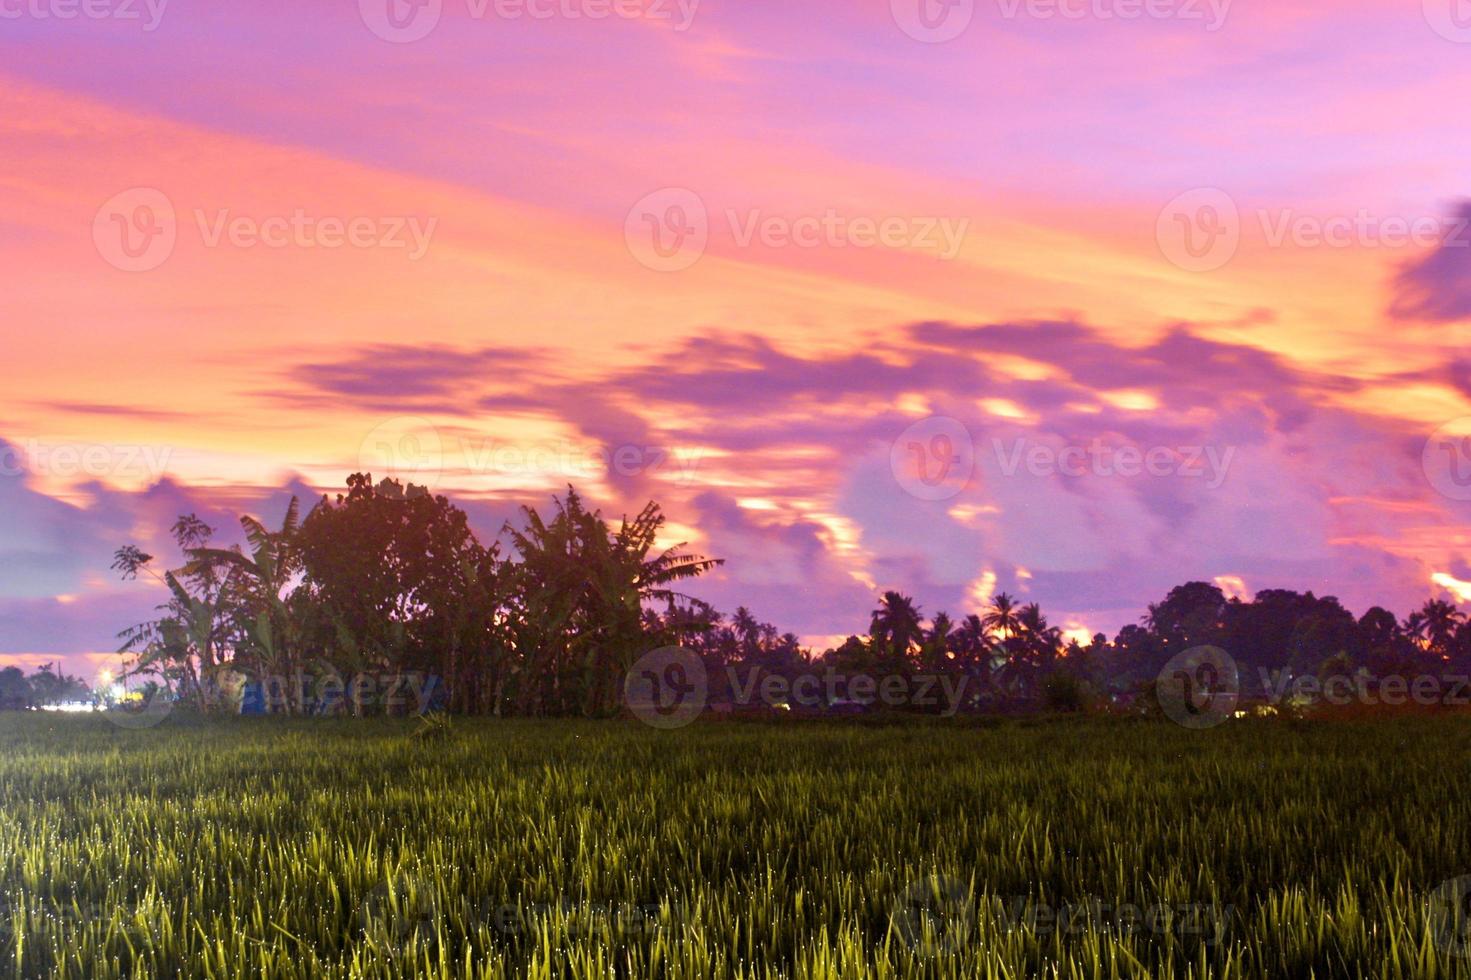 A beauty sunset over the rice field photo